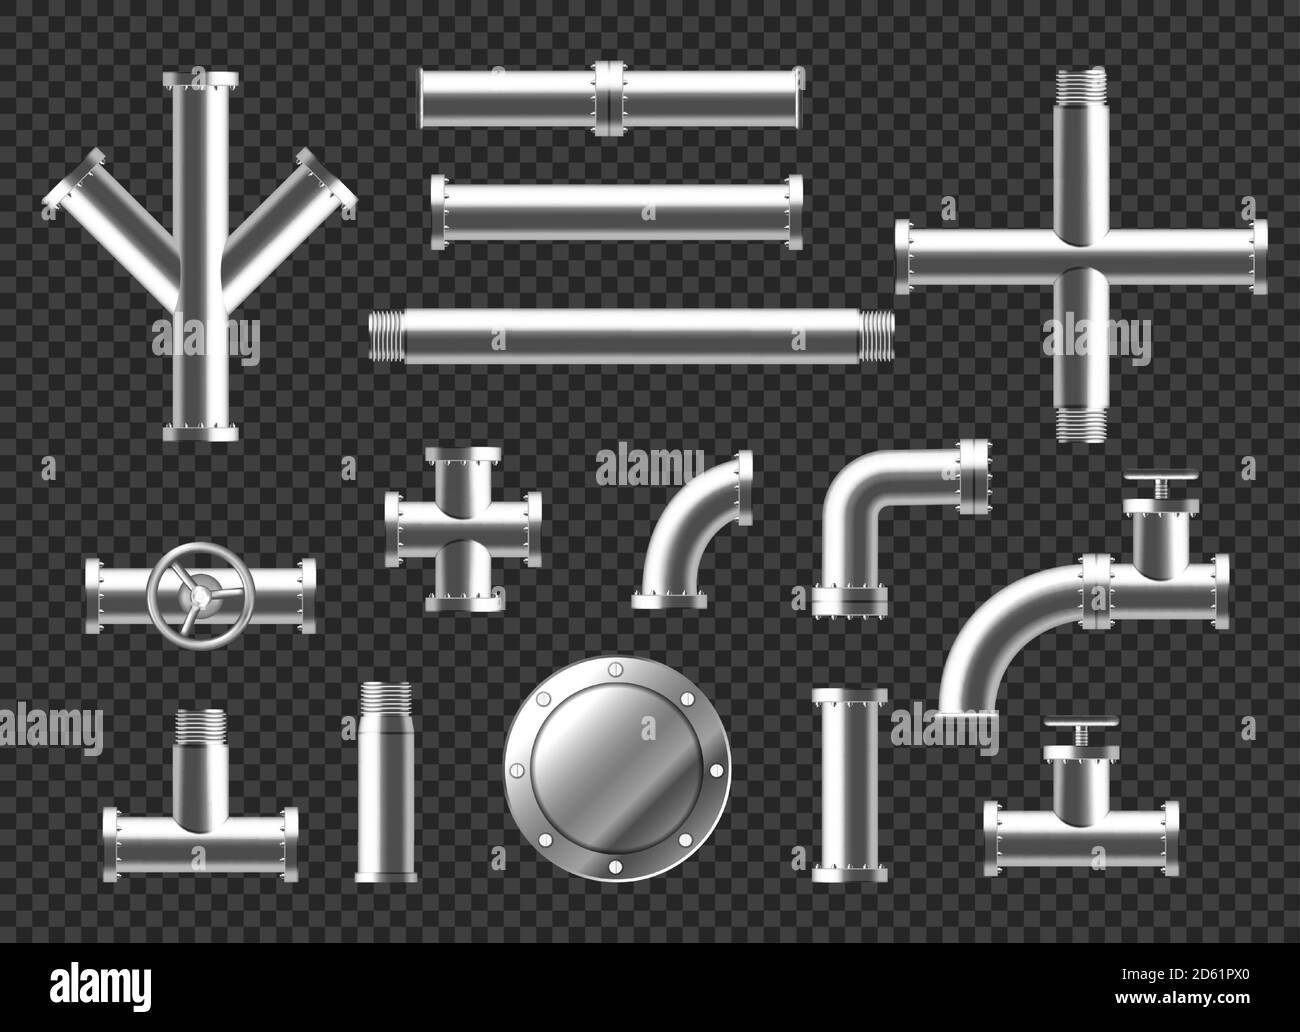 Pipes and tubes plumbing fittings realistic 3d vector set. Metal or plastic pipeline with valves, thread and faucets. Stainless steel metallic ramified connections isolated on transparent background Stock Vector